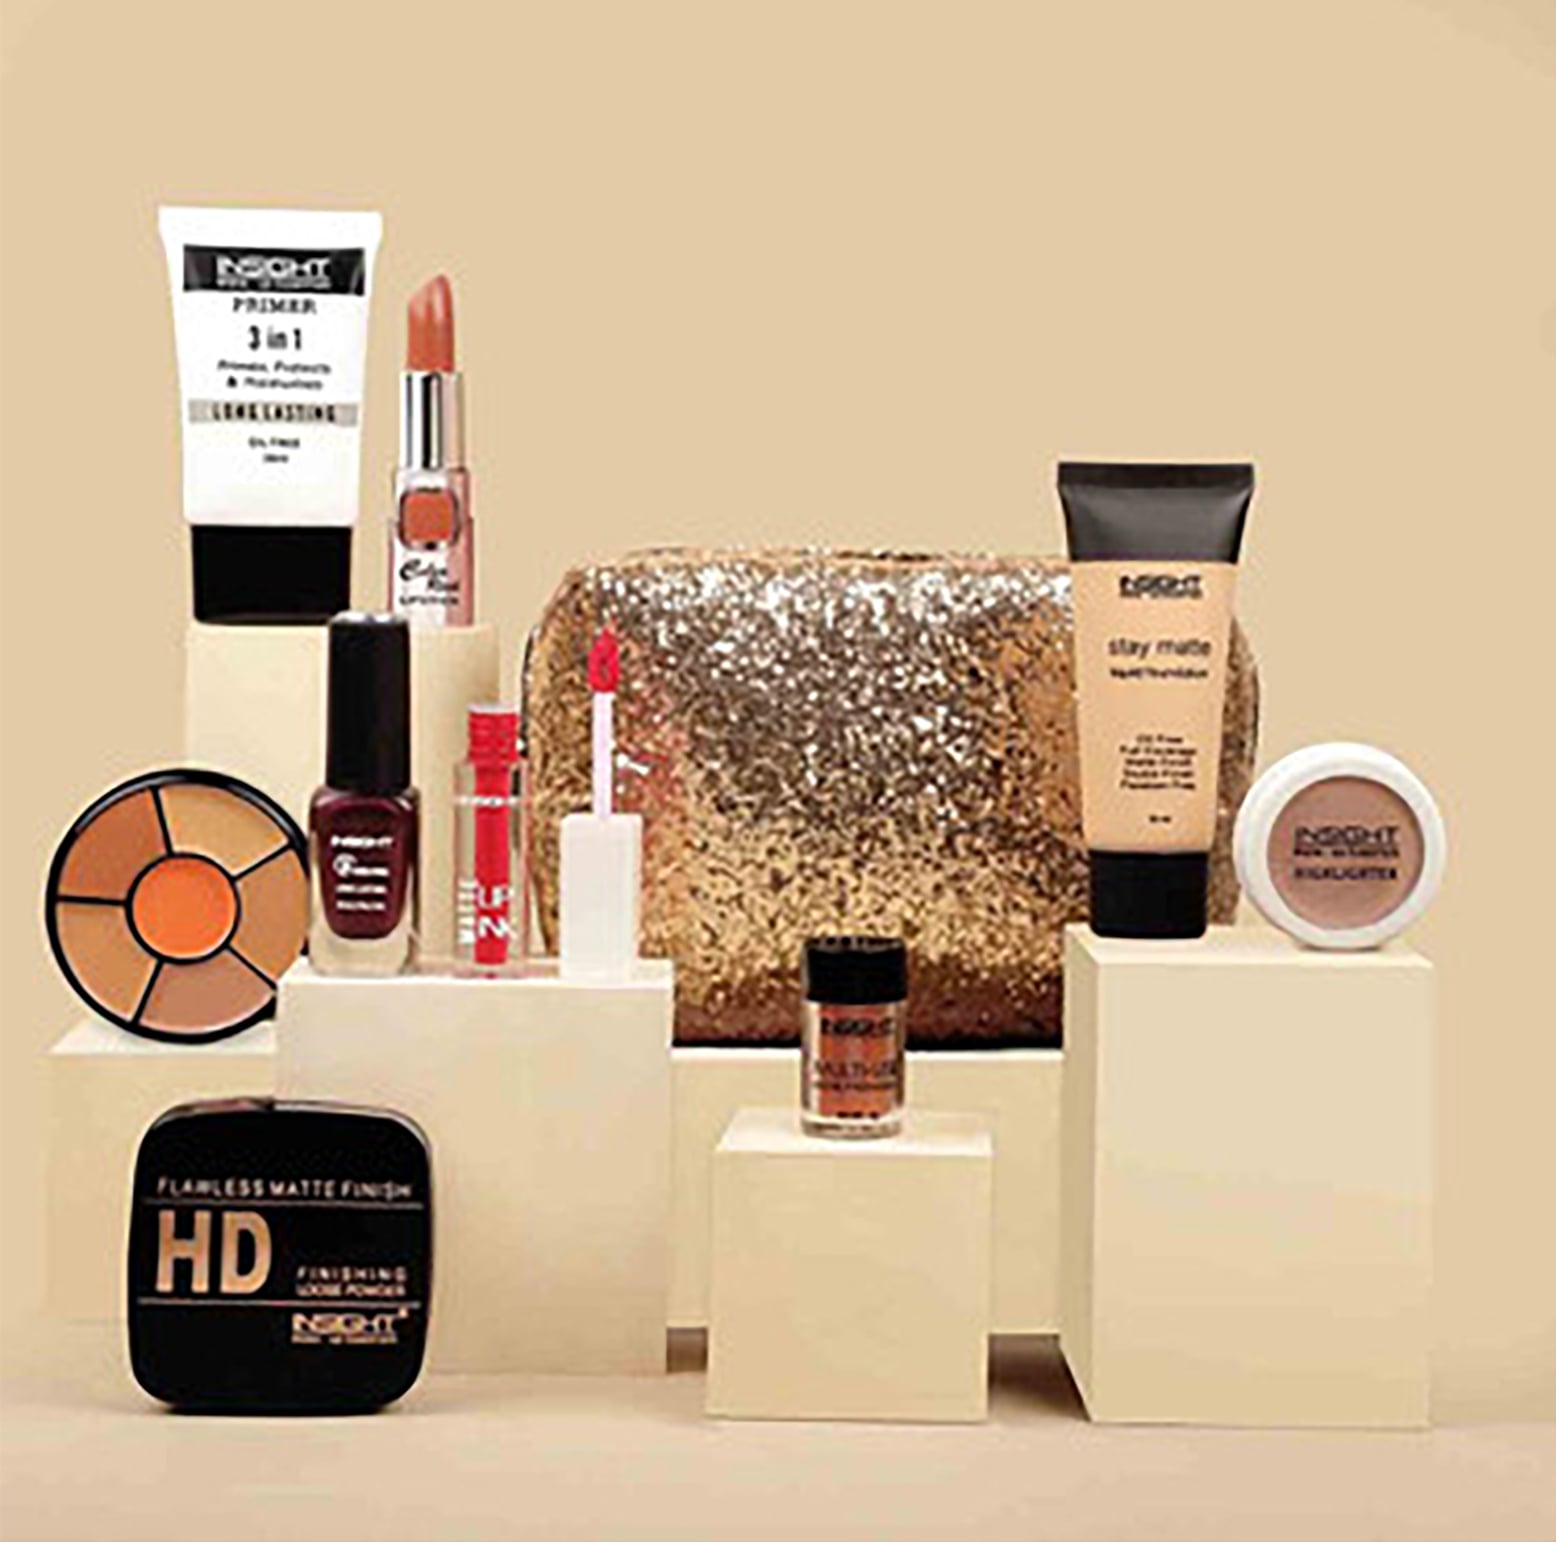 Stor mængde automatisk resterende Insight Cosmetics Launched 'The Essential Kit 2.0' product - Bold Outline :  India's leading Online Lifestyle, Fashion & Travel Magazine.